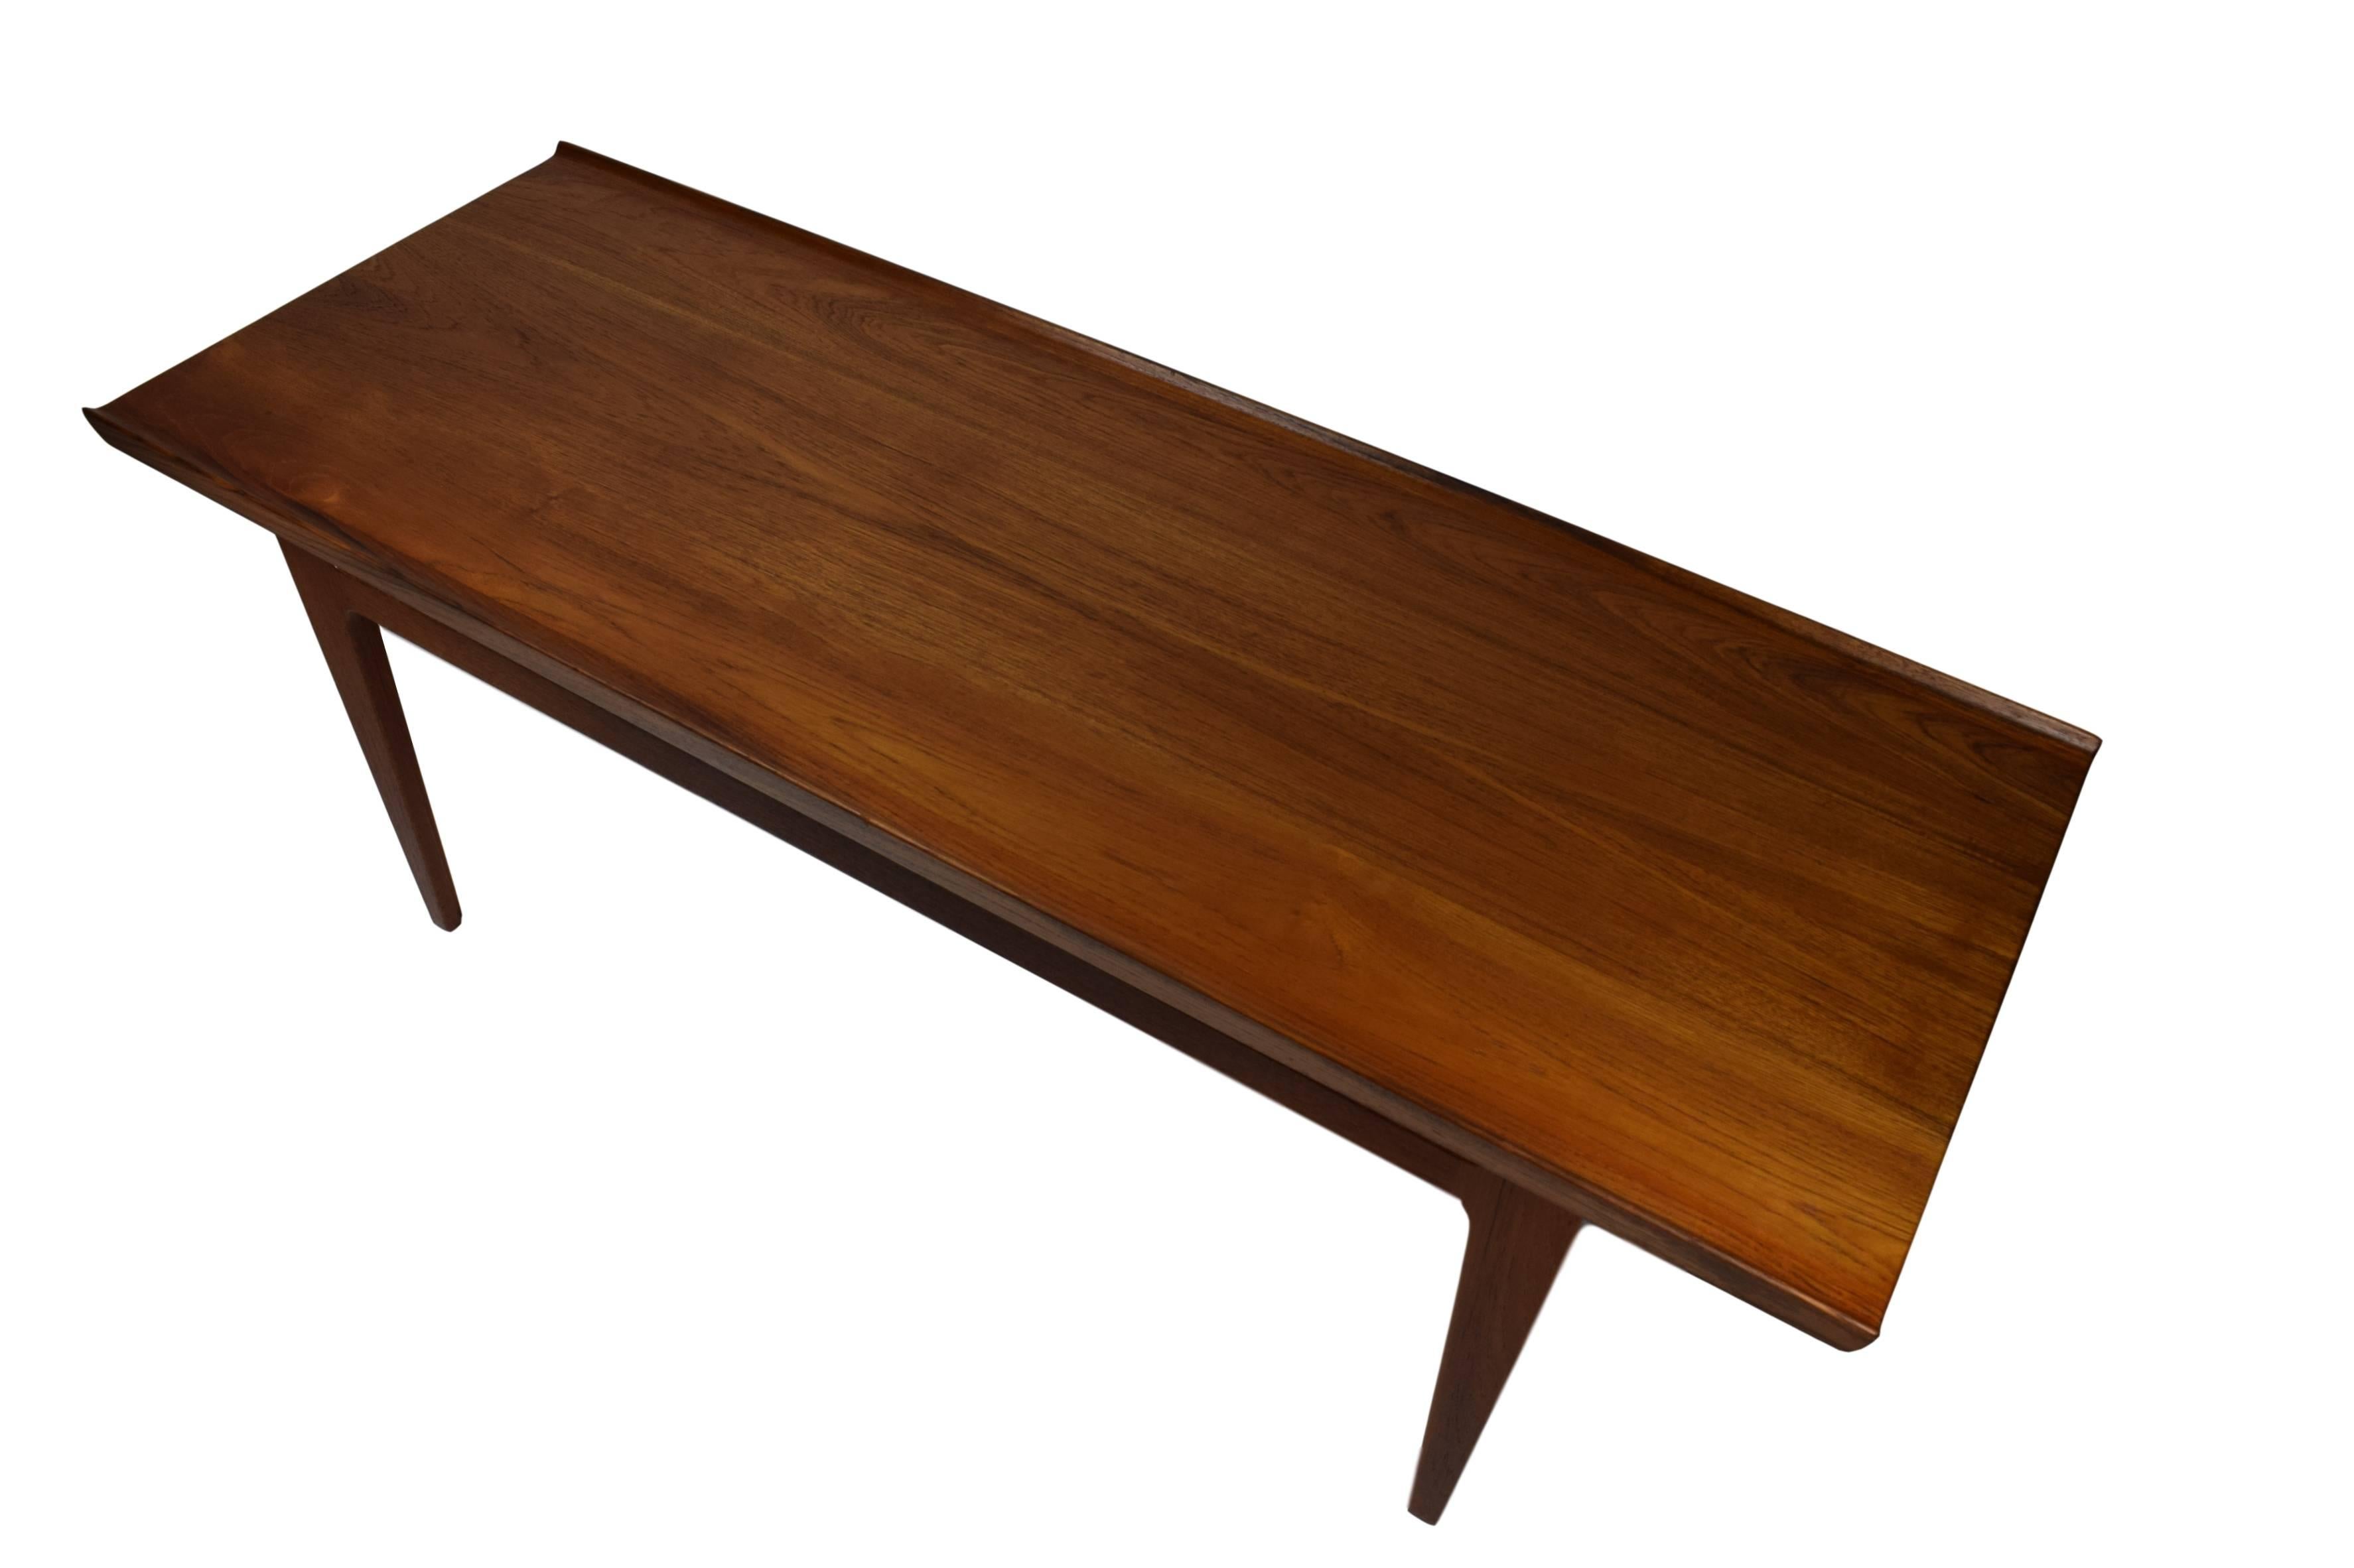 An original Danish midcentury solid teak coffee table by Finn Juhl (1912-1984). Model FD631 designed in 1958. Produced by France & Daverkosen (after 1957 called France & Son). The table has raised edges along both sides and is newly refinished.